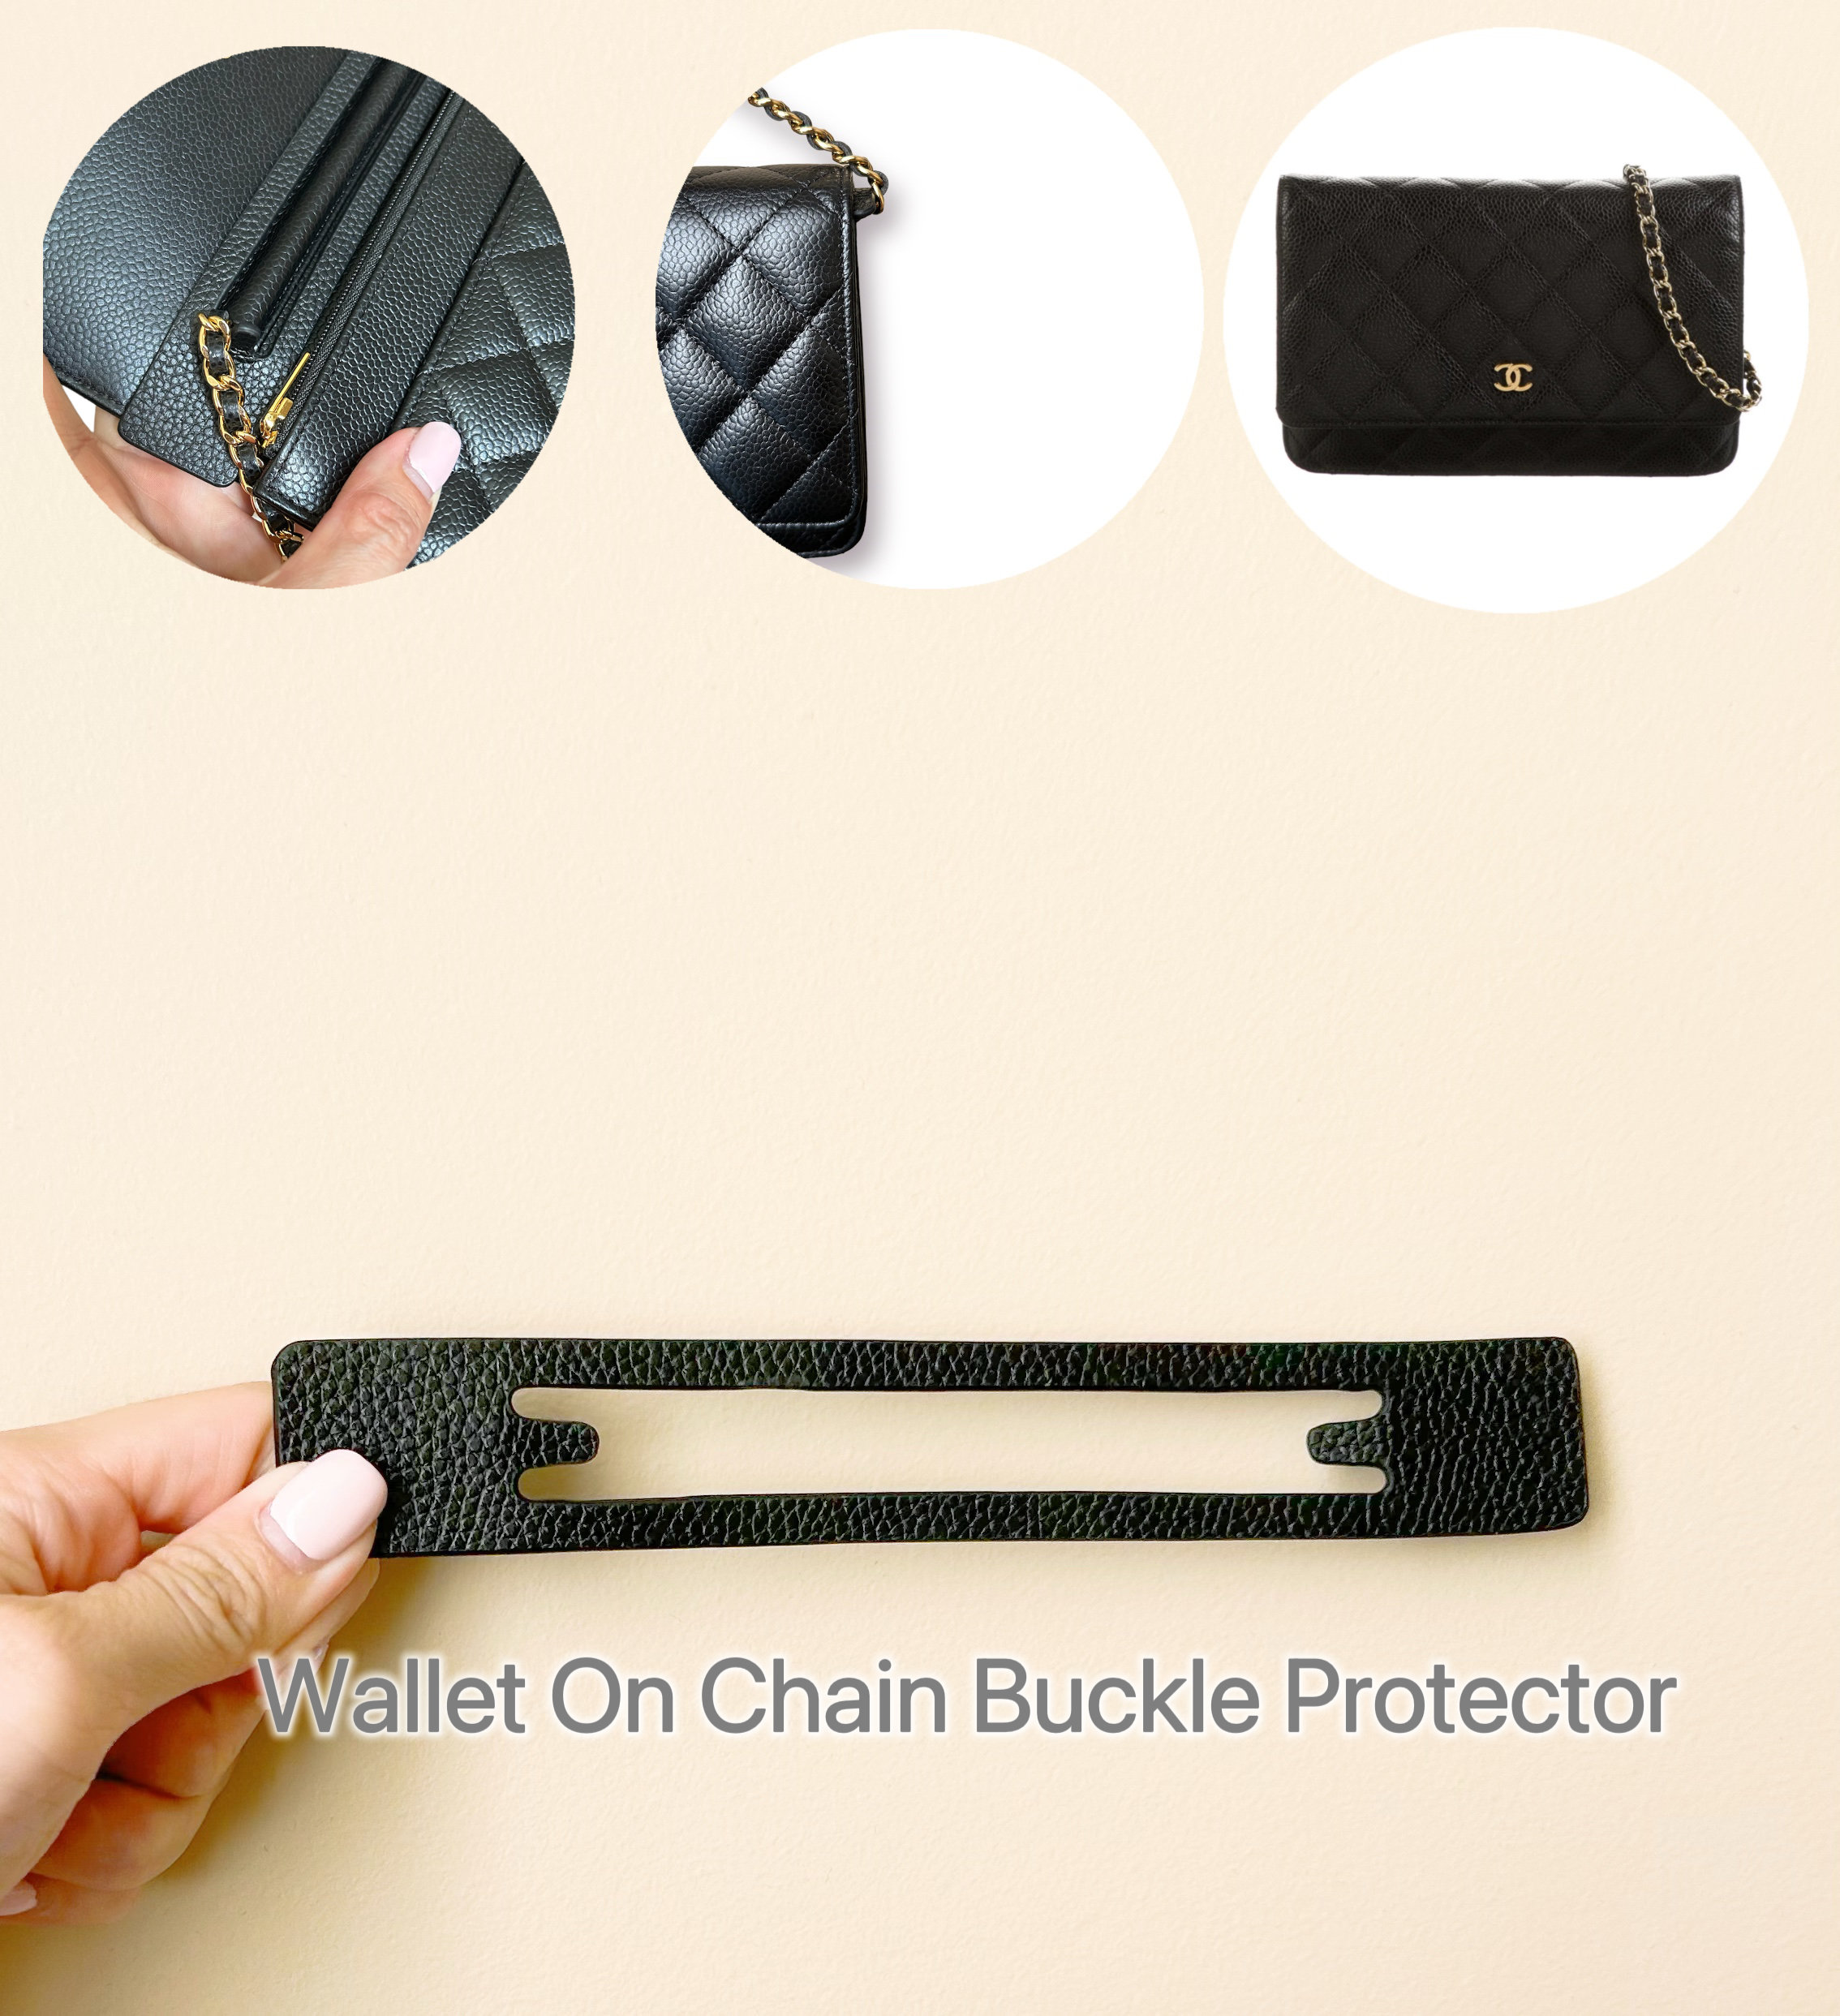 Wallet on Chain Base Shaper / Base Insert / Bag Protector Organizer for C H  A N E L WOC bag NOT Included 